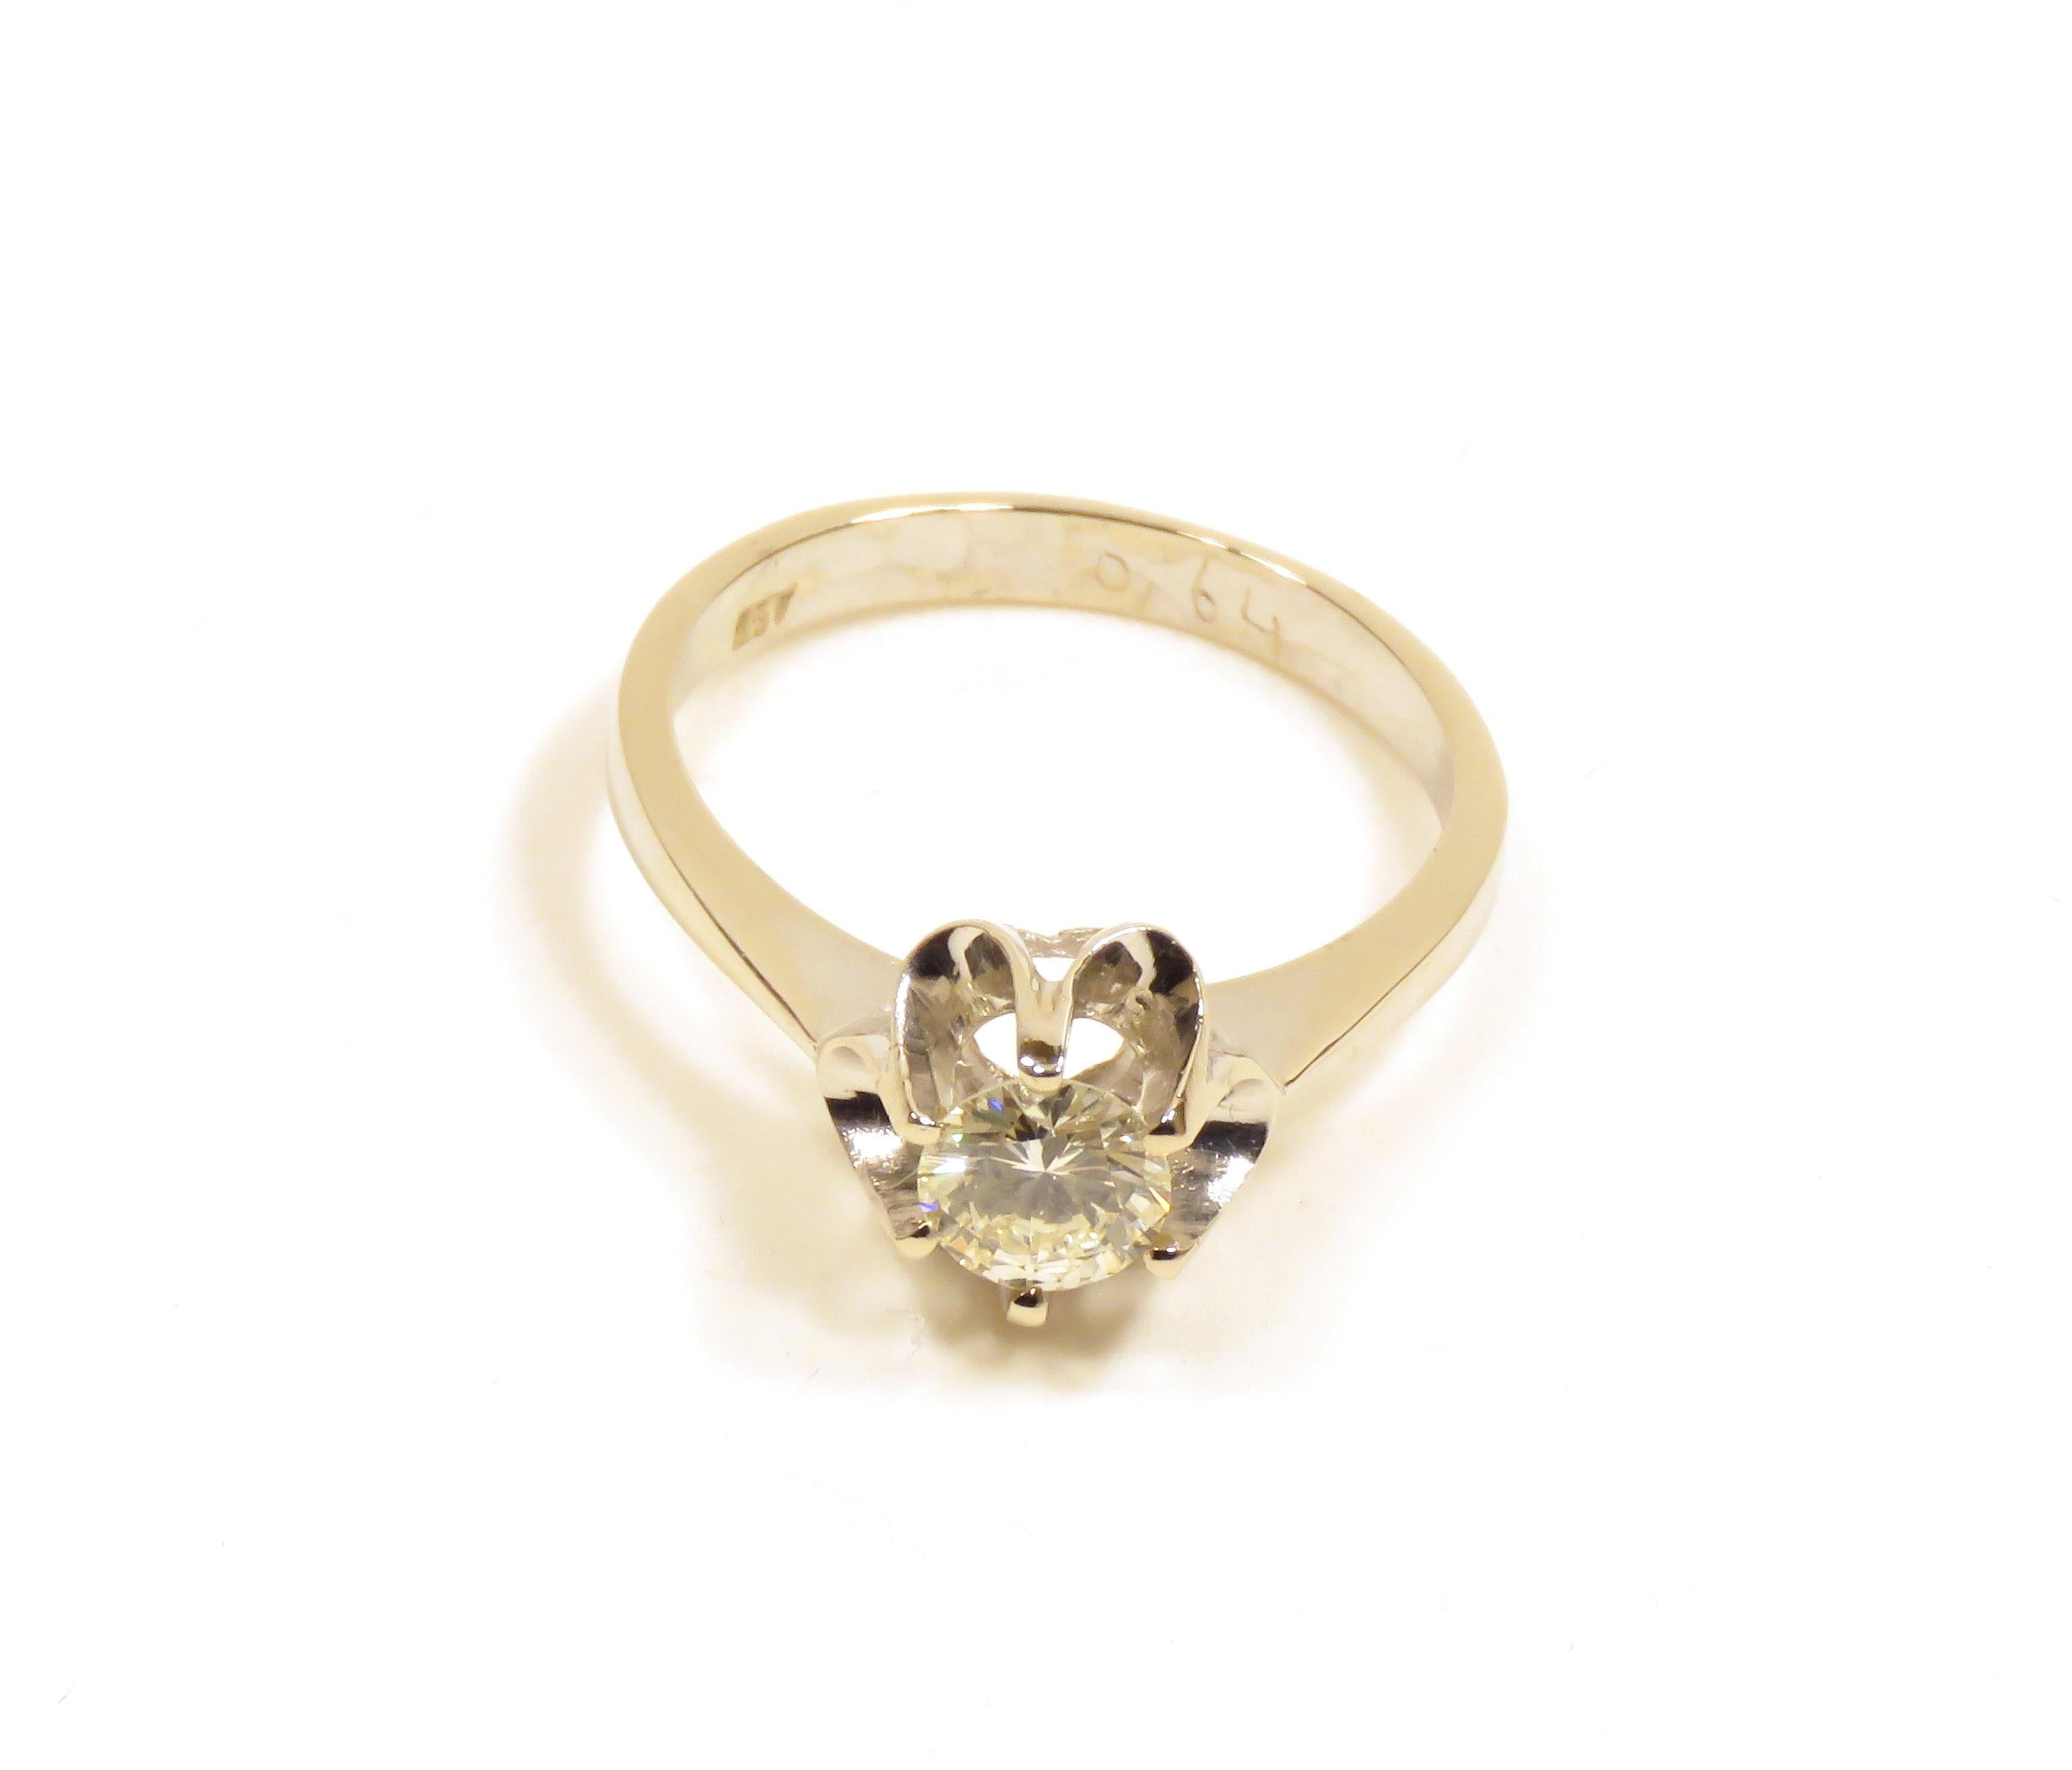 Antique and harmonious diamond solitaire engagement ring dating back to the 1950s in 18 carat white gold with a round brilliant diamond 0.60 carat, IGI certified, color K/L clarity SI. US finger size: 7 3/4, French size 57, Italian size 17,